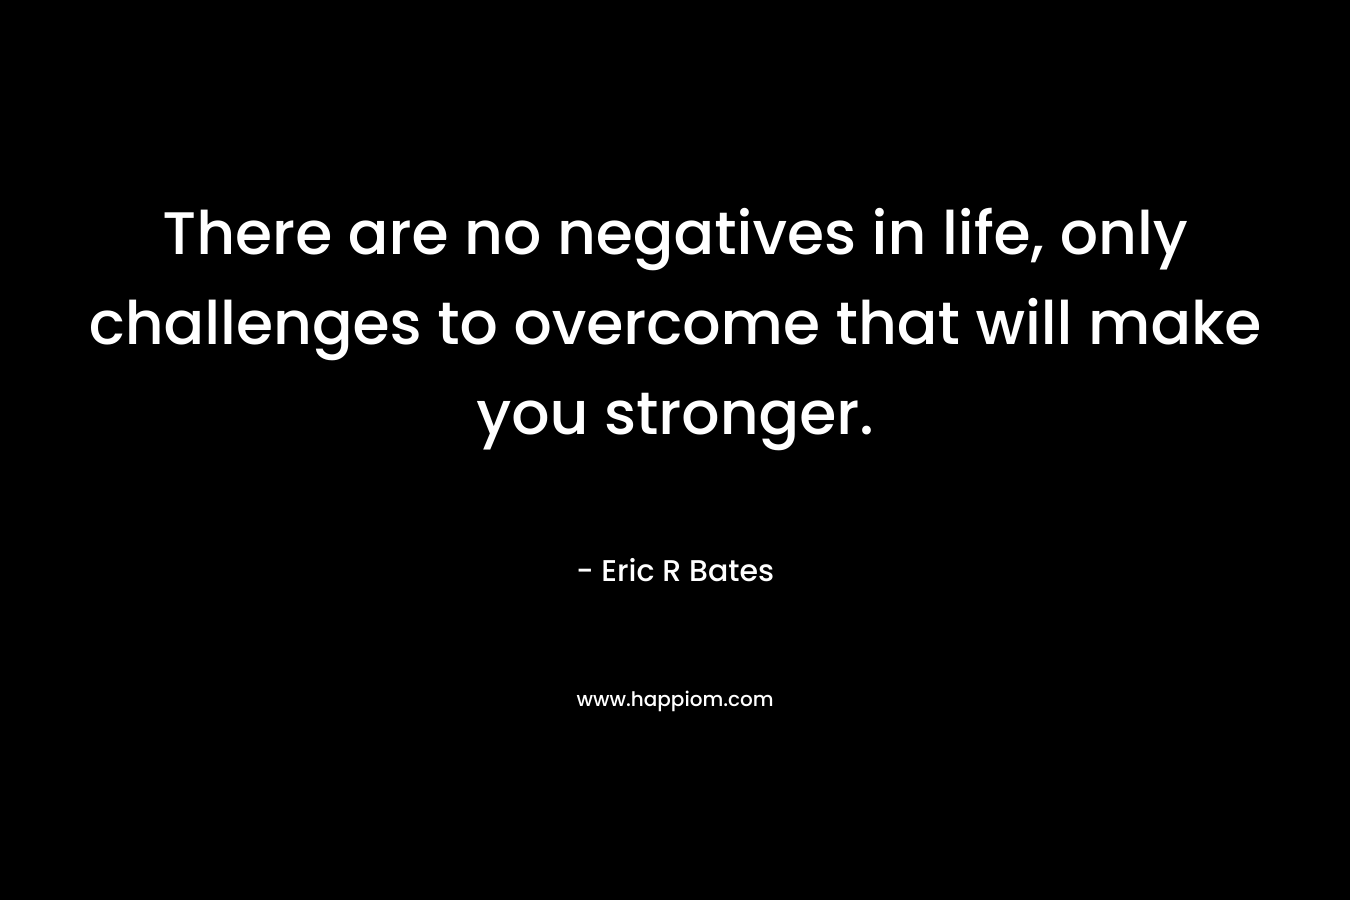 There are no negatives in life, only challenges to overcome that will make you stronger. – Eric R Bates